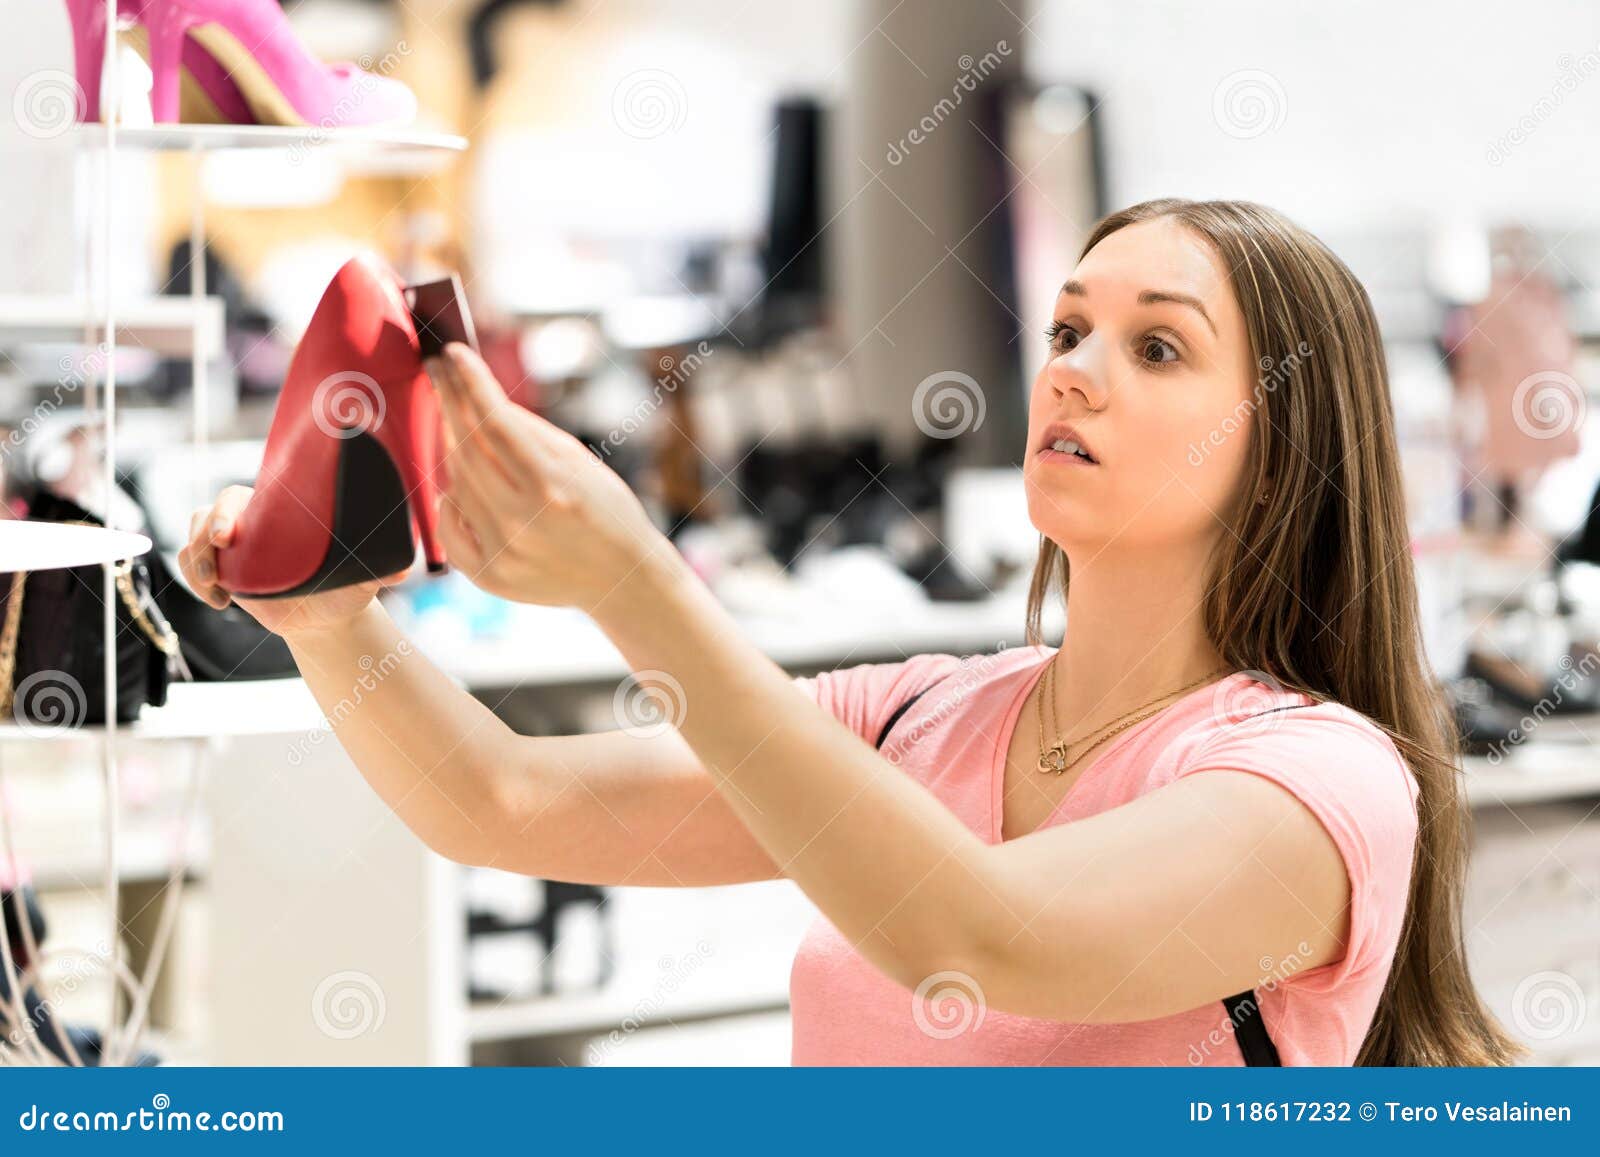 shocked woman looking at price tag of too expensive shoes.